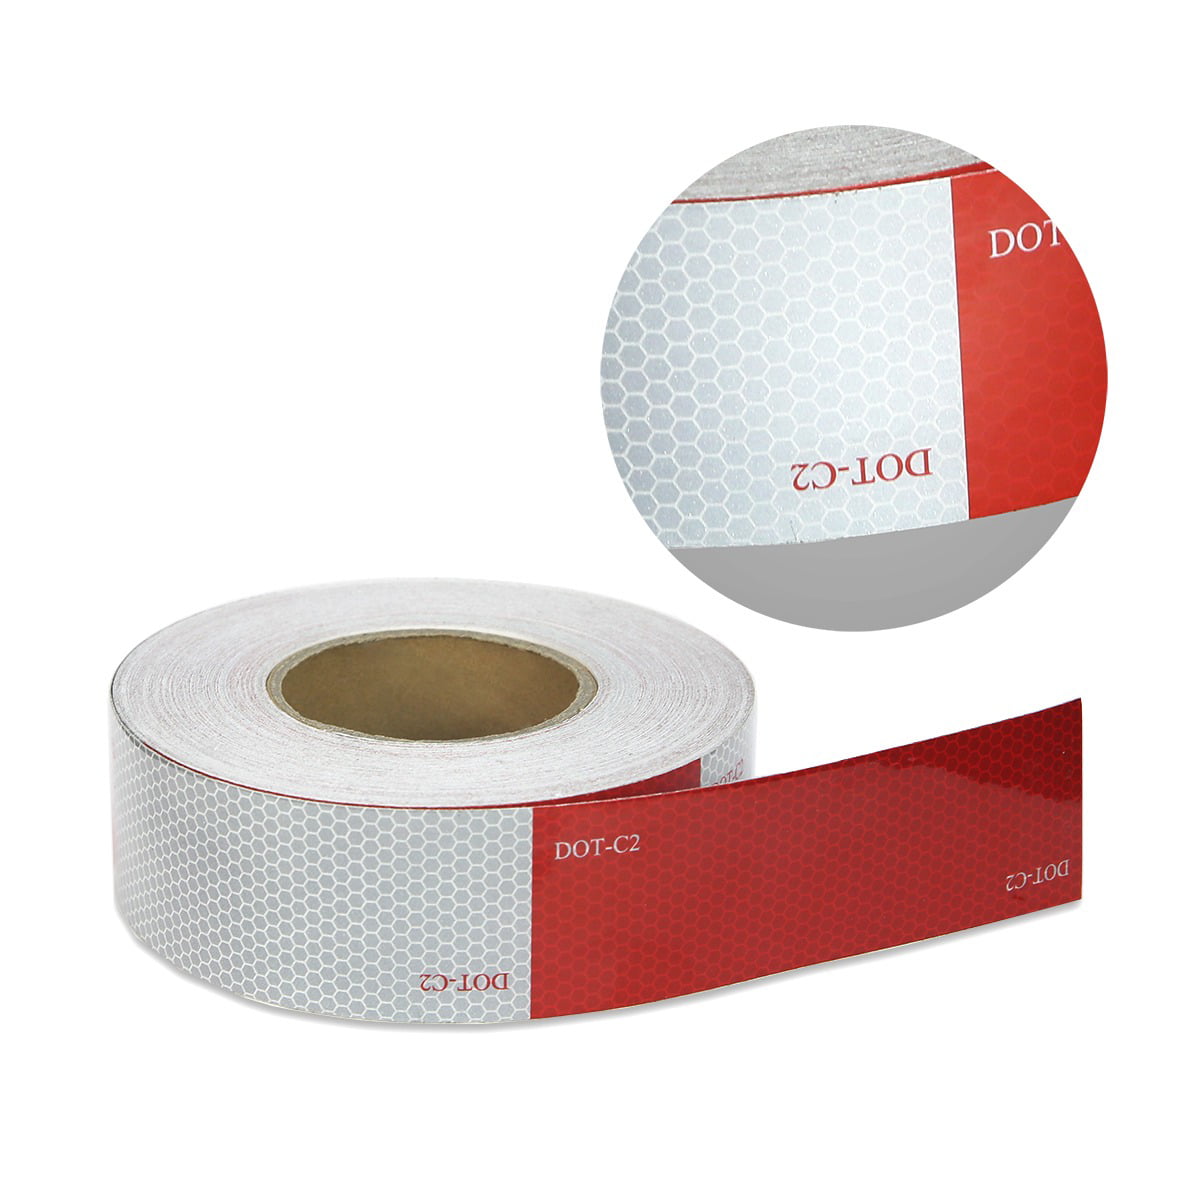 Reflective Tape DOT Conspicuity Tape 2"x150' Dot Class 2 DEFECTIVE 